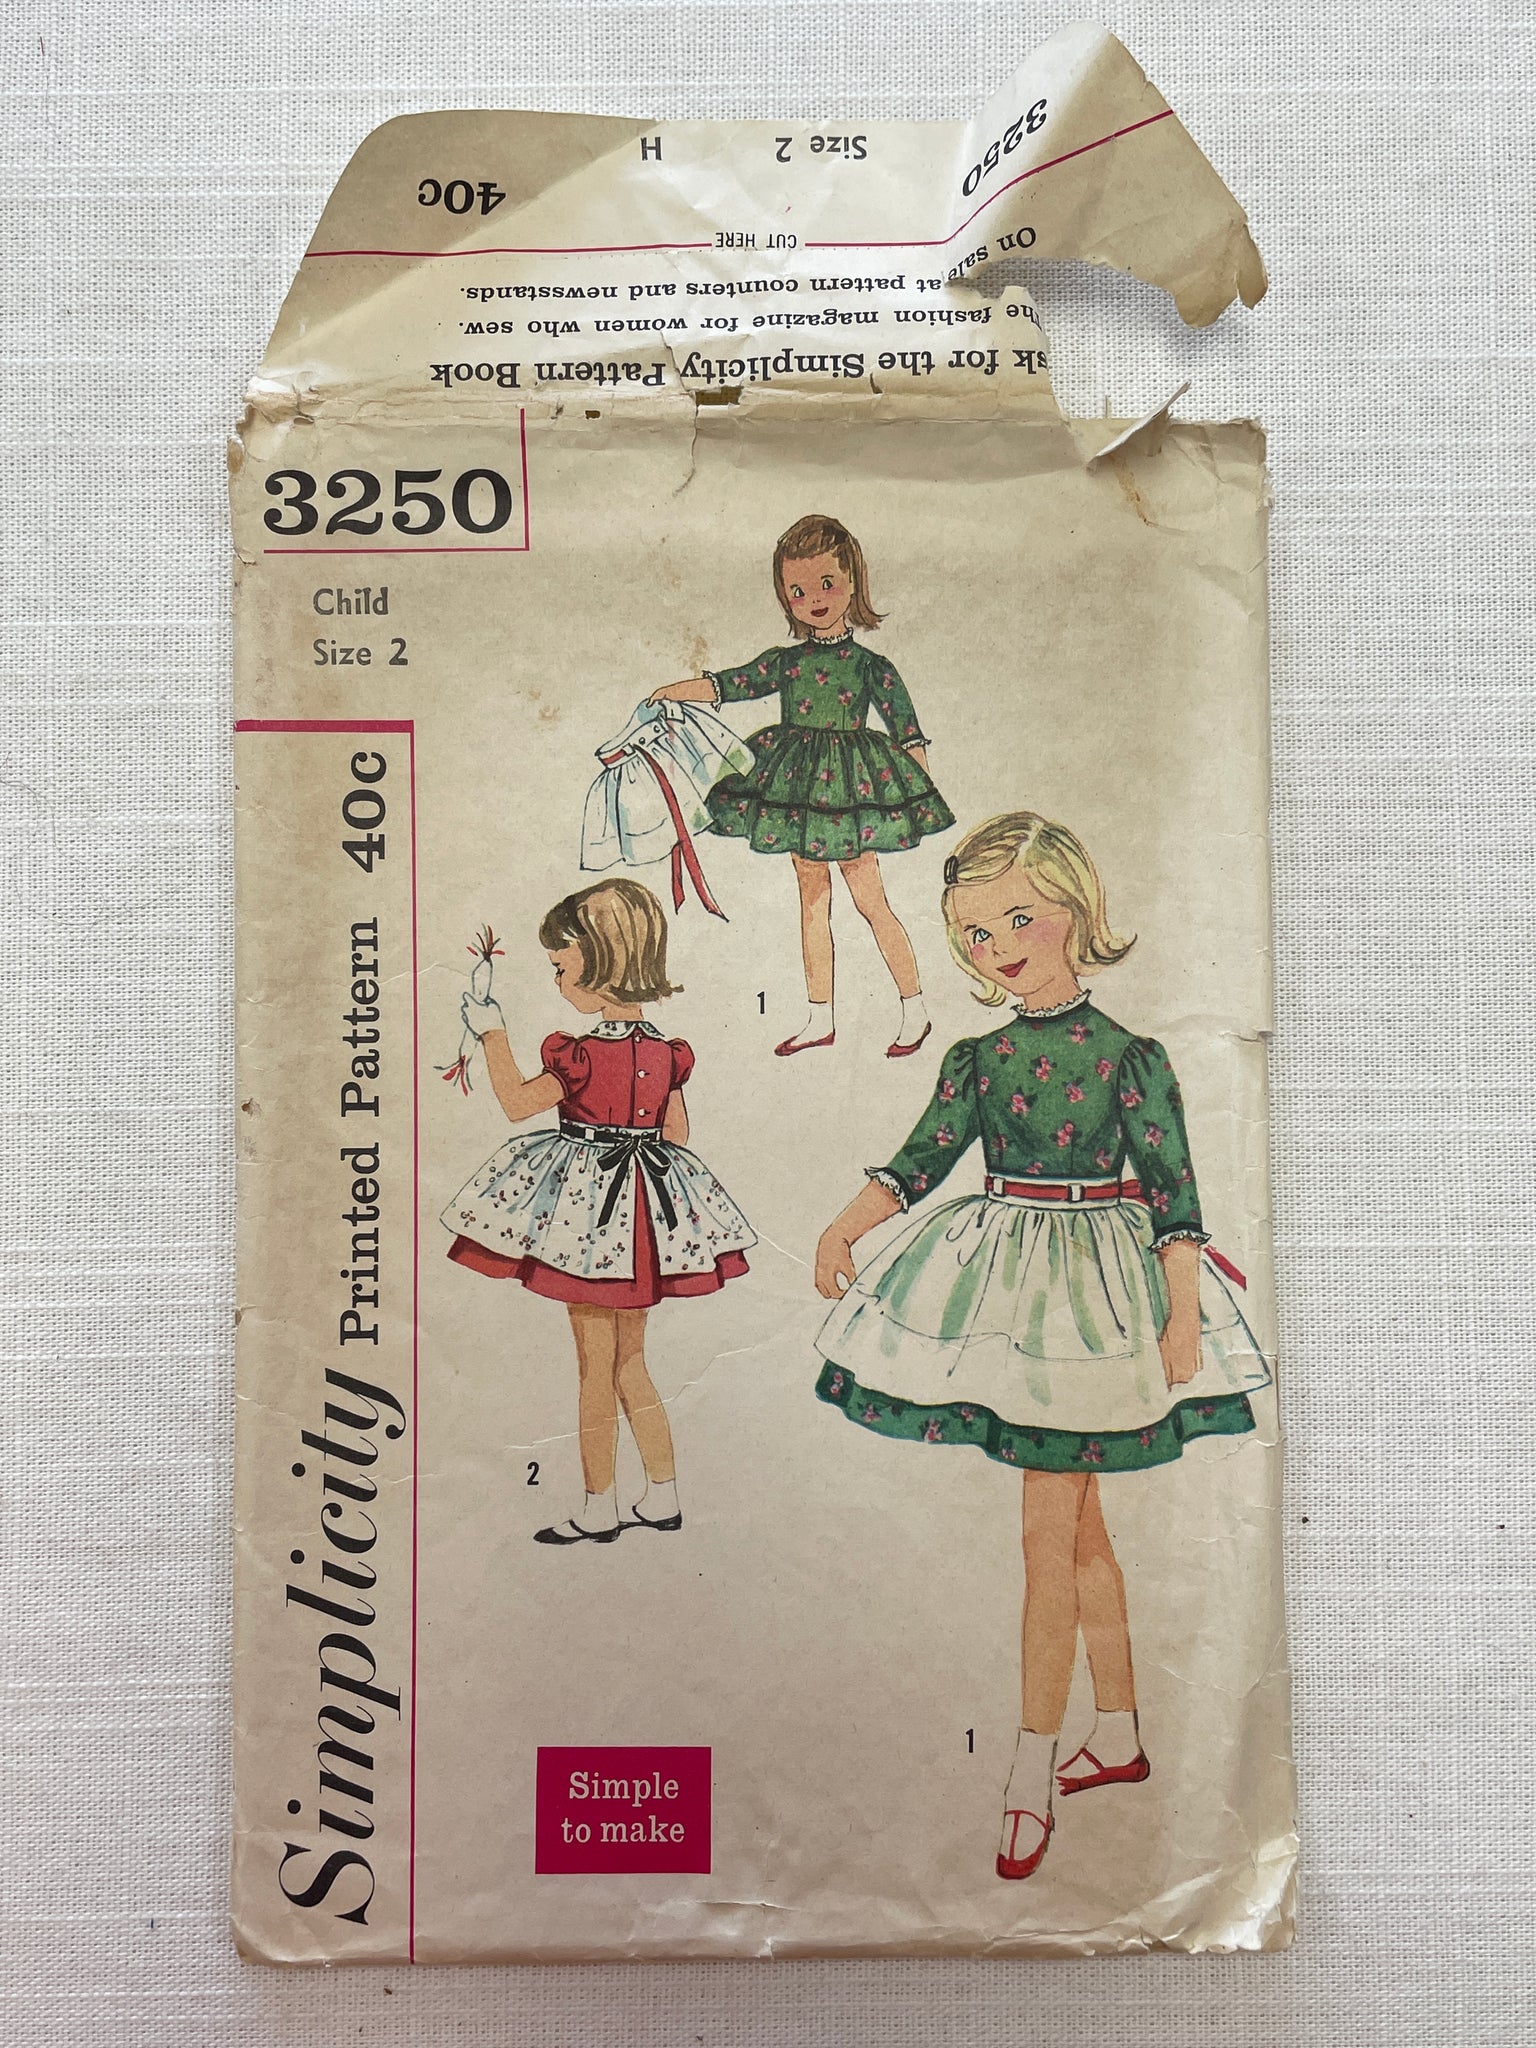 1960's Simplicity 3250 Sewing Pattern - Child's Dress and Apron